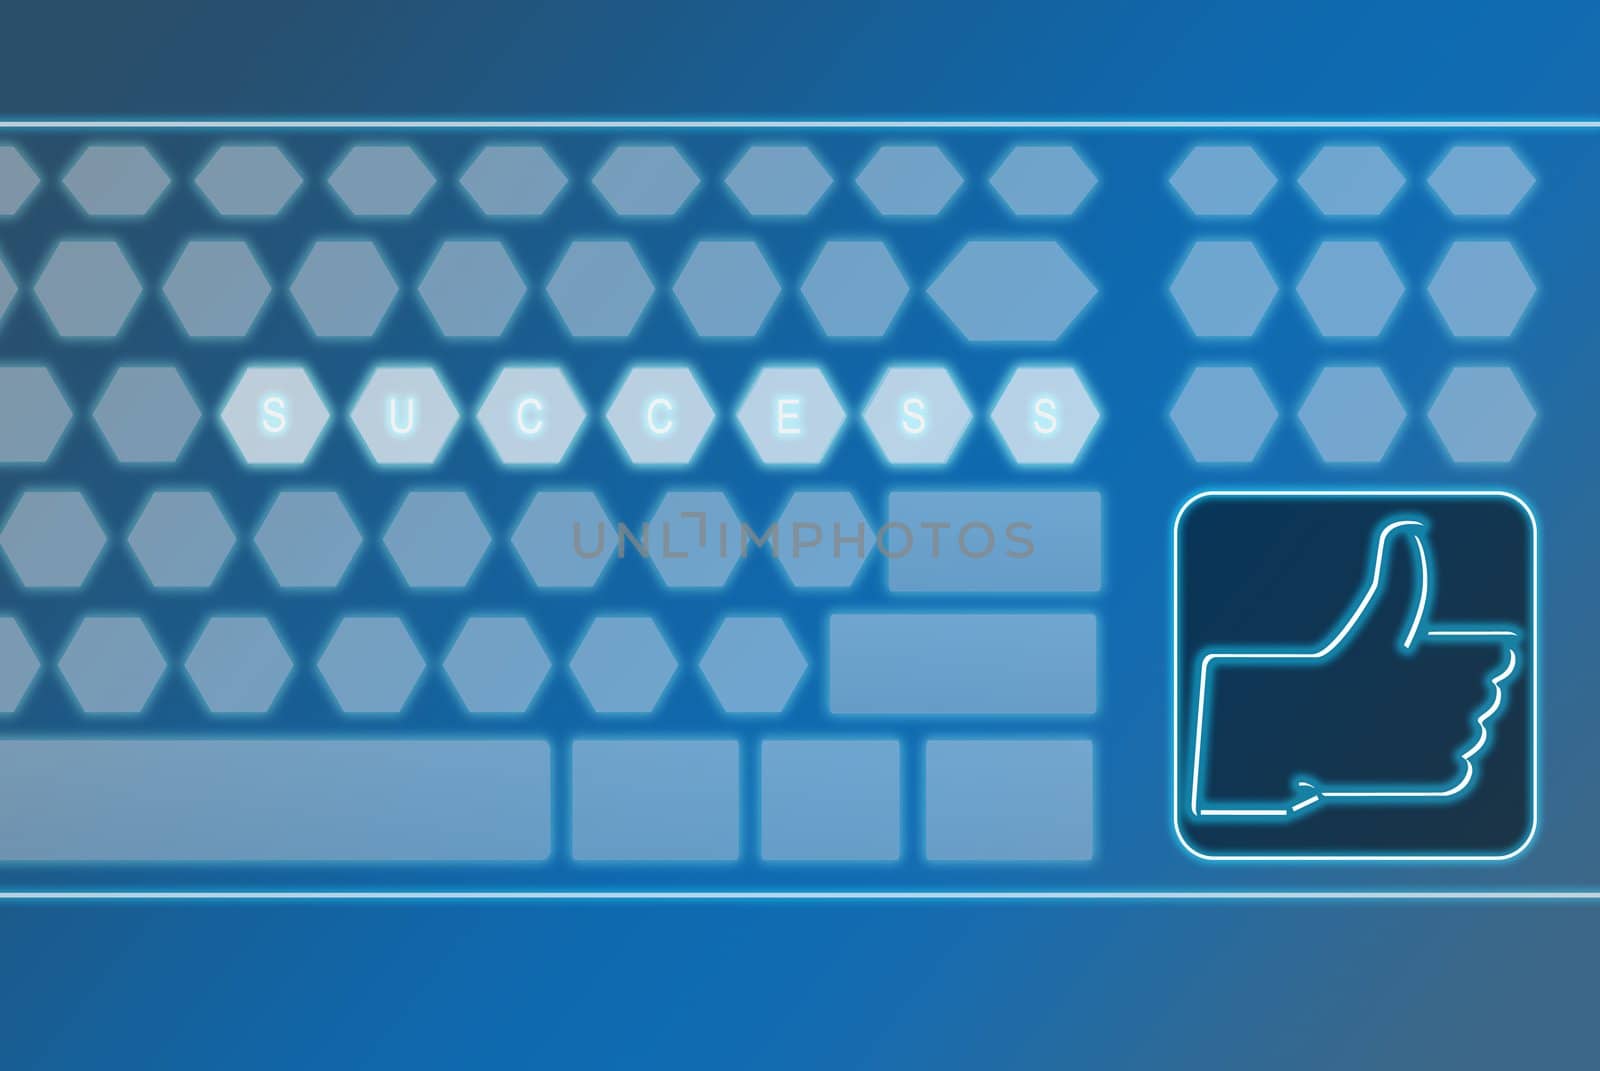 Virtual futuristic keyboard with LIKE button by sasilsolutions